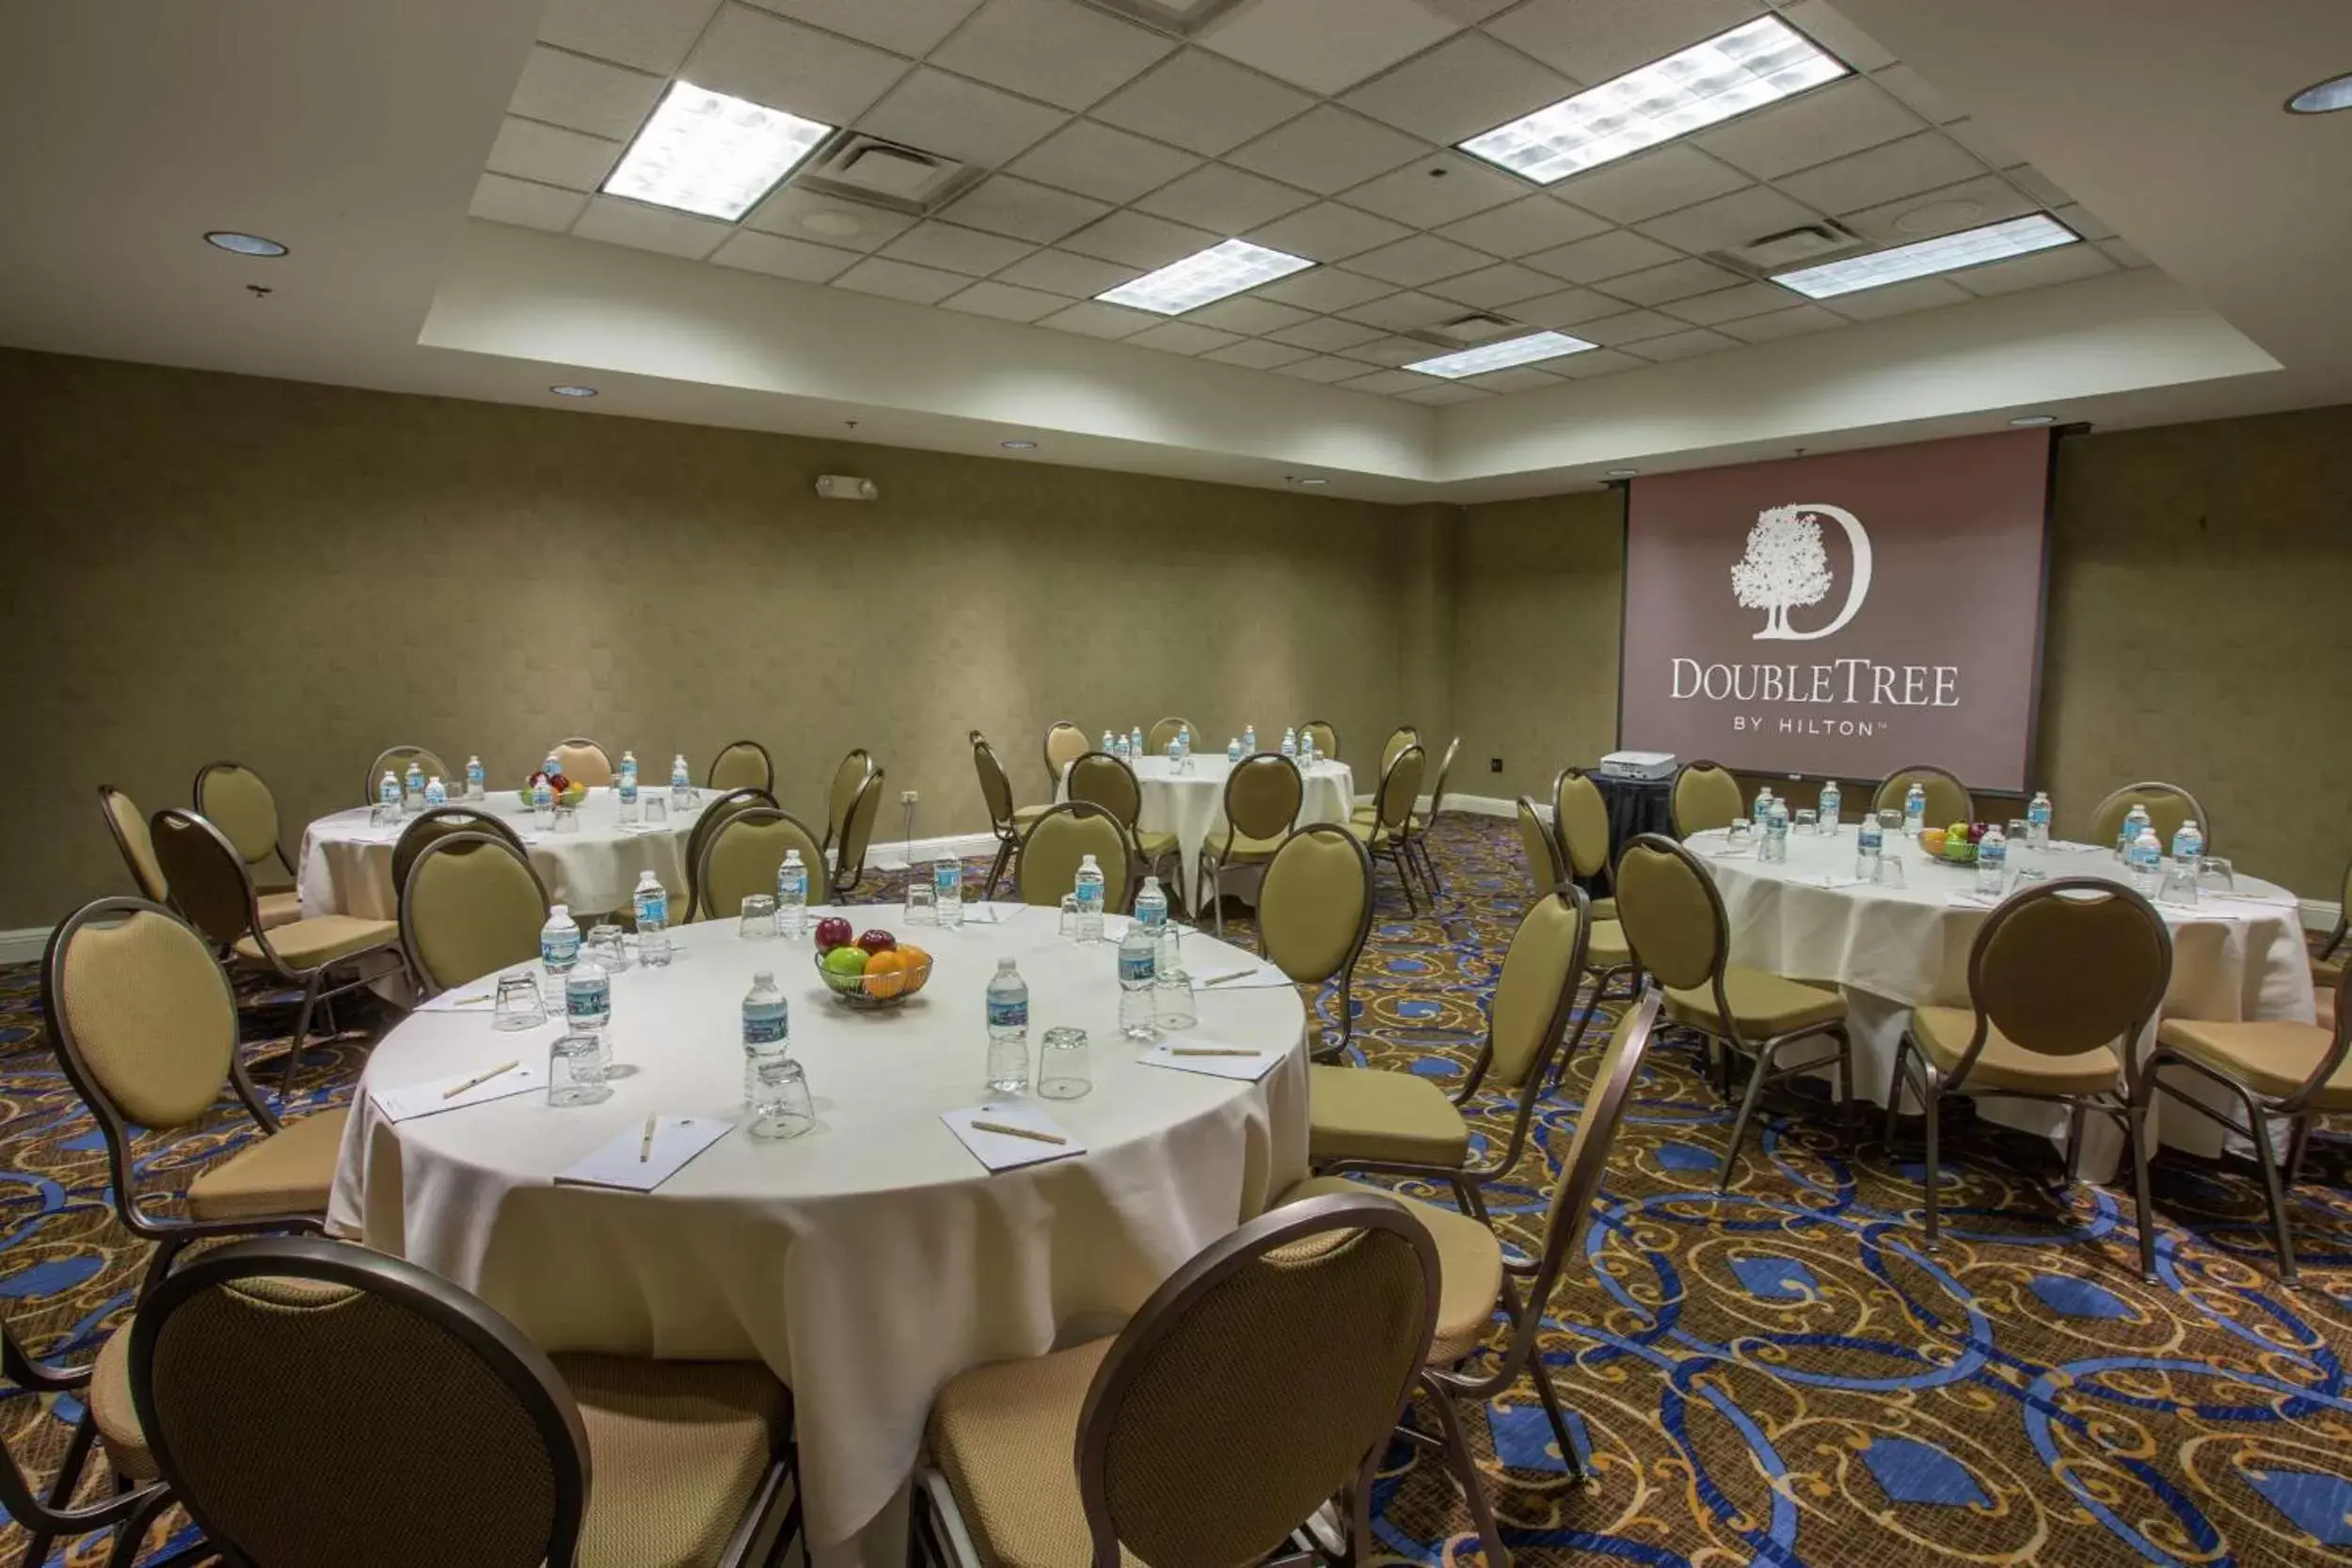 Meeting/conference room, Banquet Facilities in DoubleTree by Hilton Chicago O'Hare Airport-Rosemont